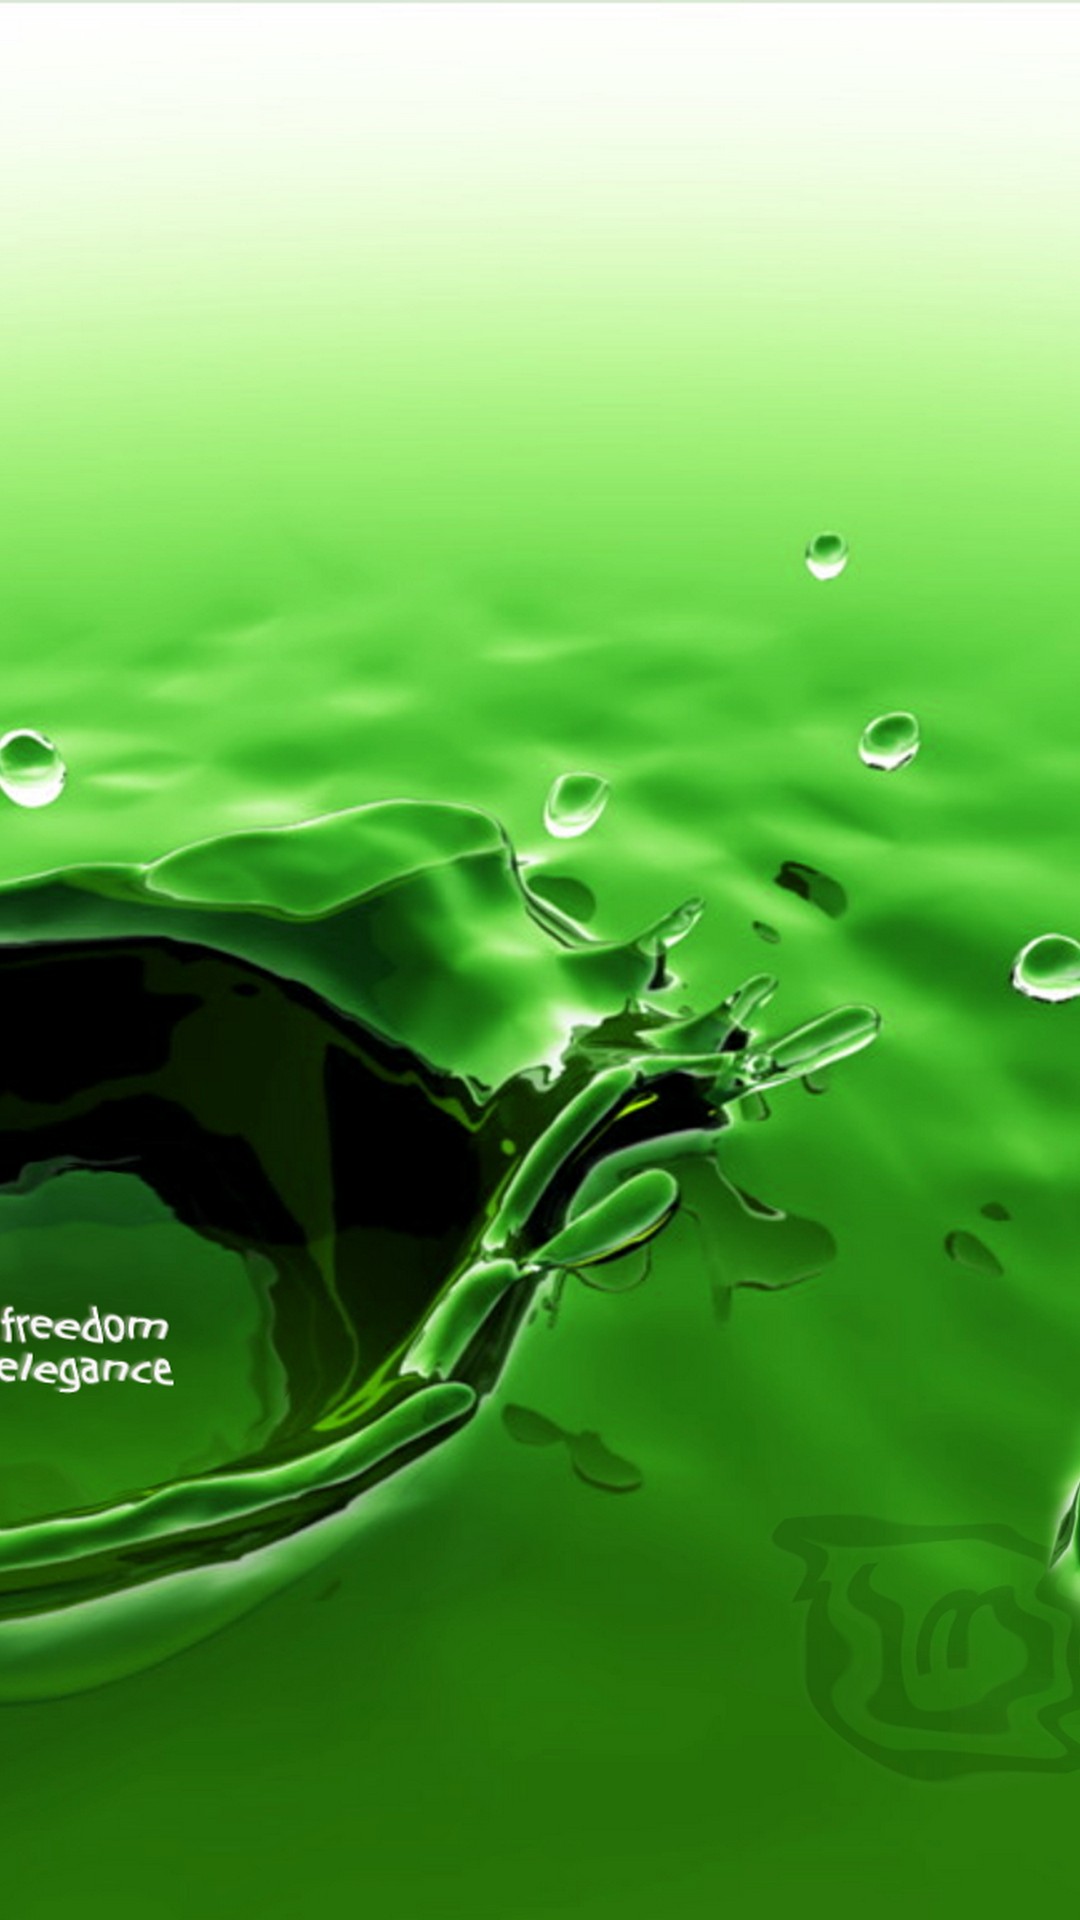 Android Wallpaper Green Colour with image resolution 1080x1920 pixel. You can make this wallpaper for your Android backgrounds, Tablet, Smartphones Screensavers and Mobile Phone Lock Screen